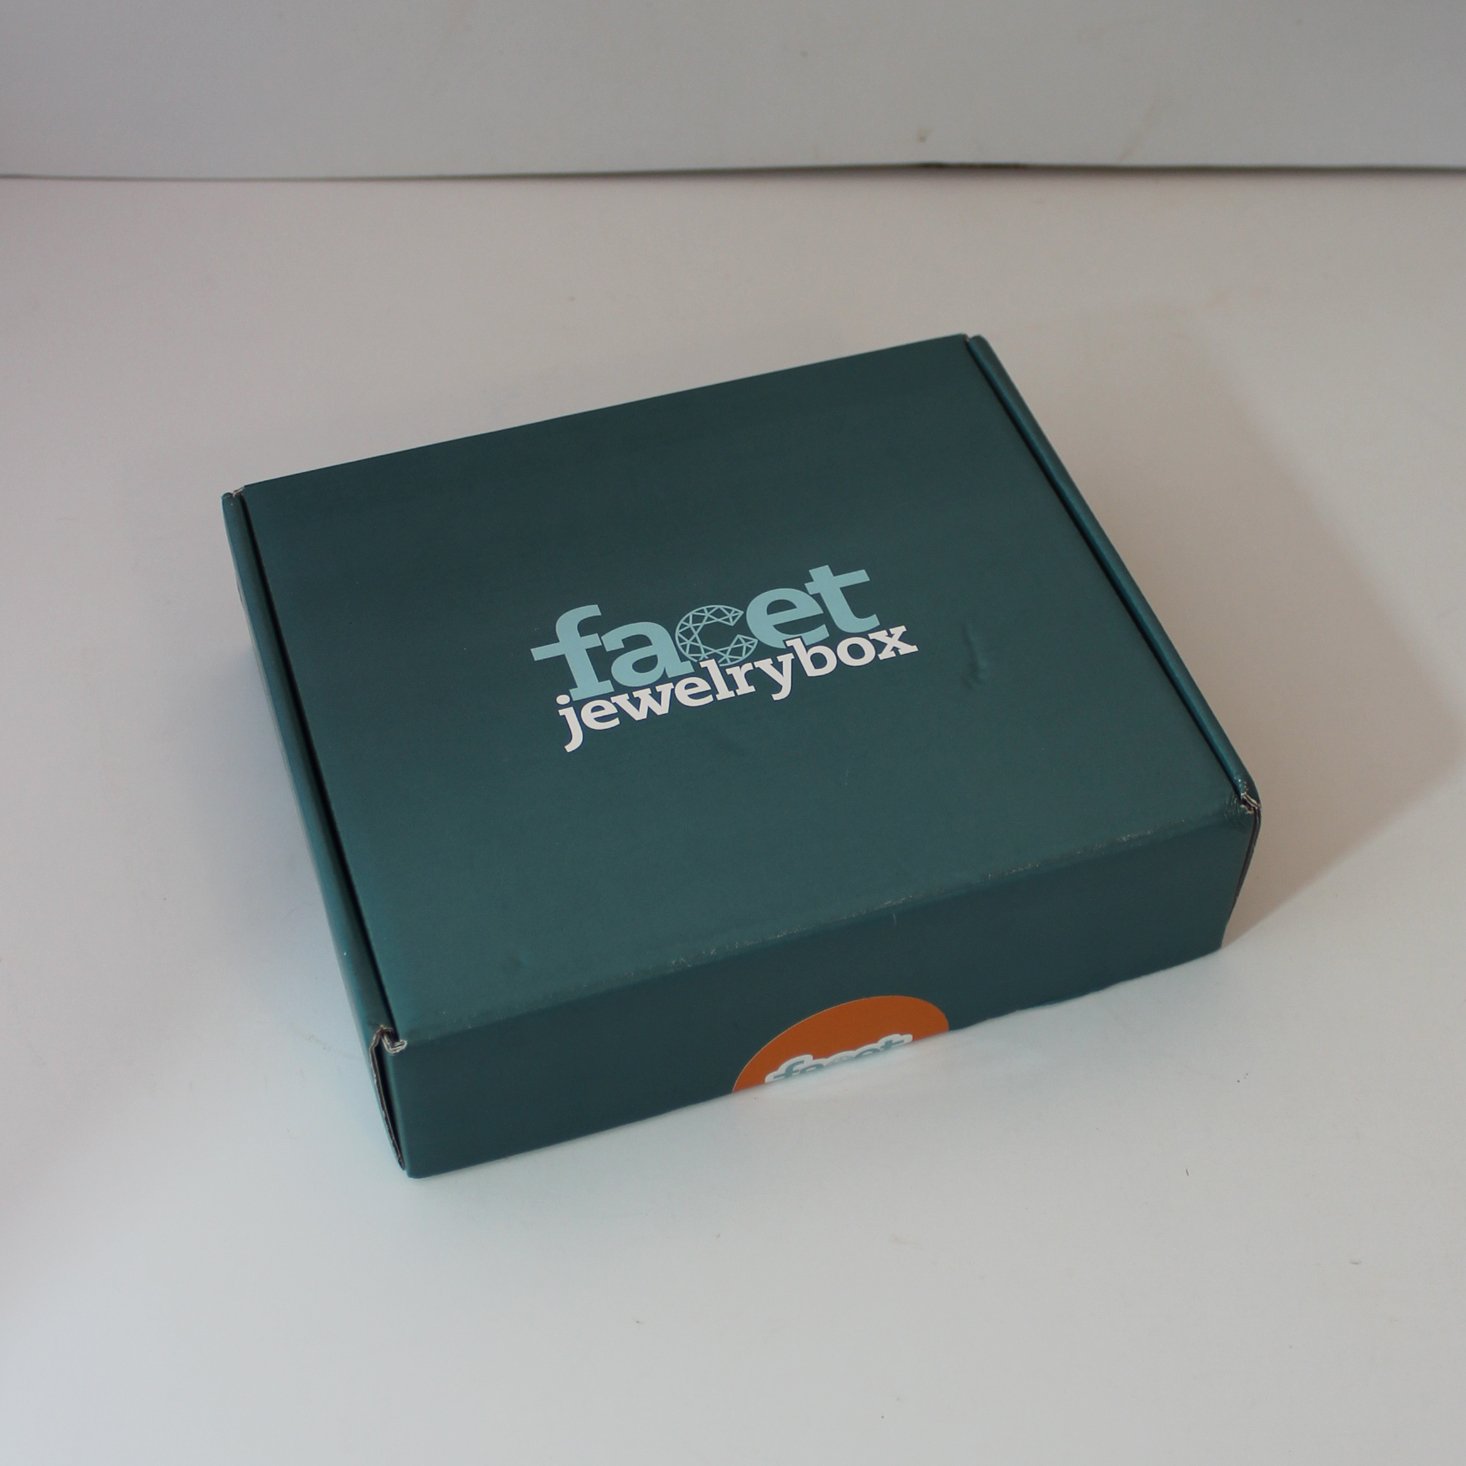 Facet Jewelry Box Bead Stitching Review – September 2019